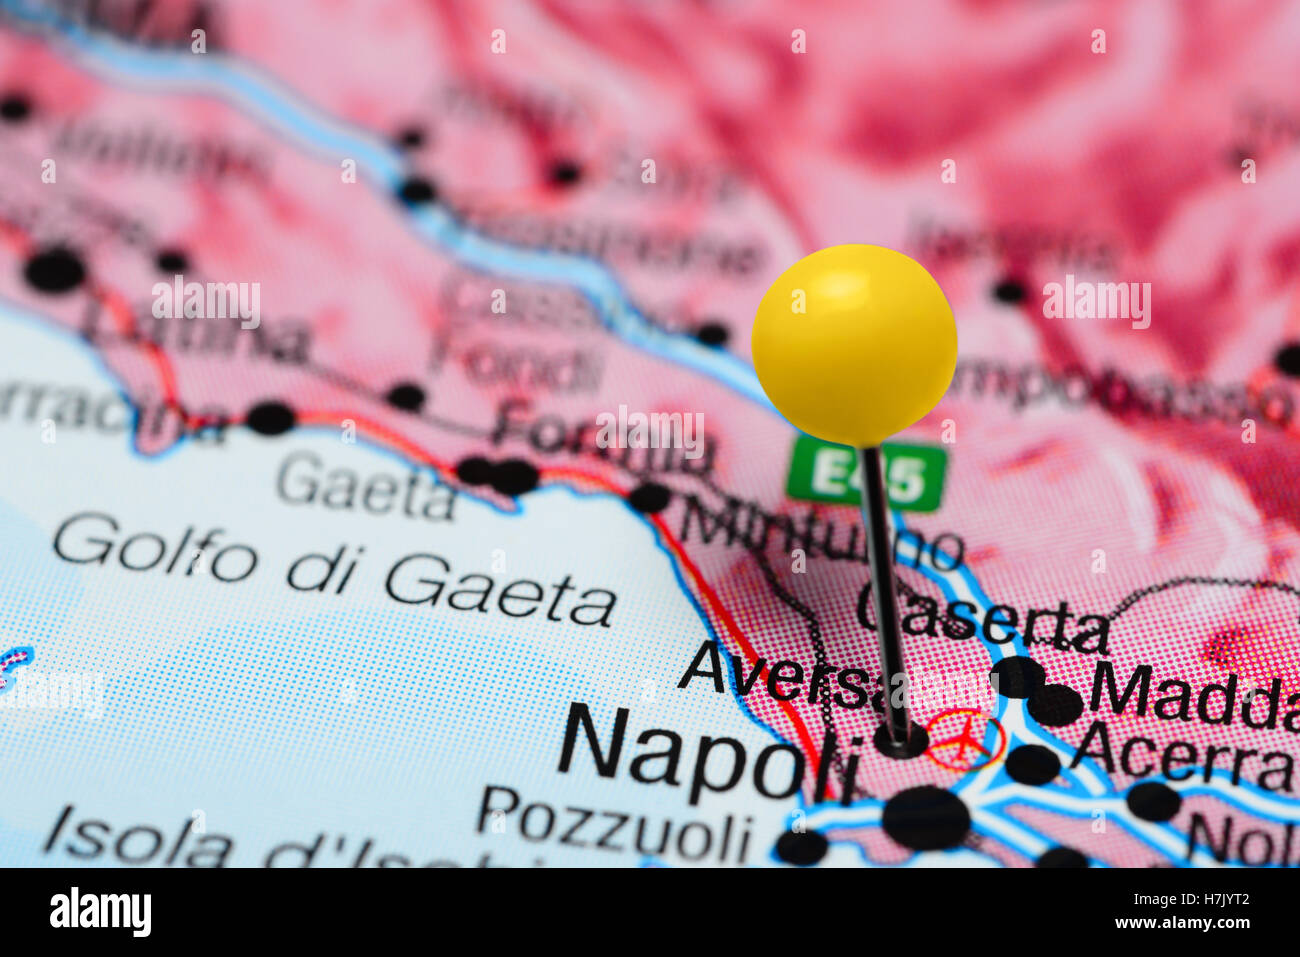 Aversa pinned on a map of Italy Stock Photo